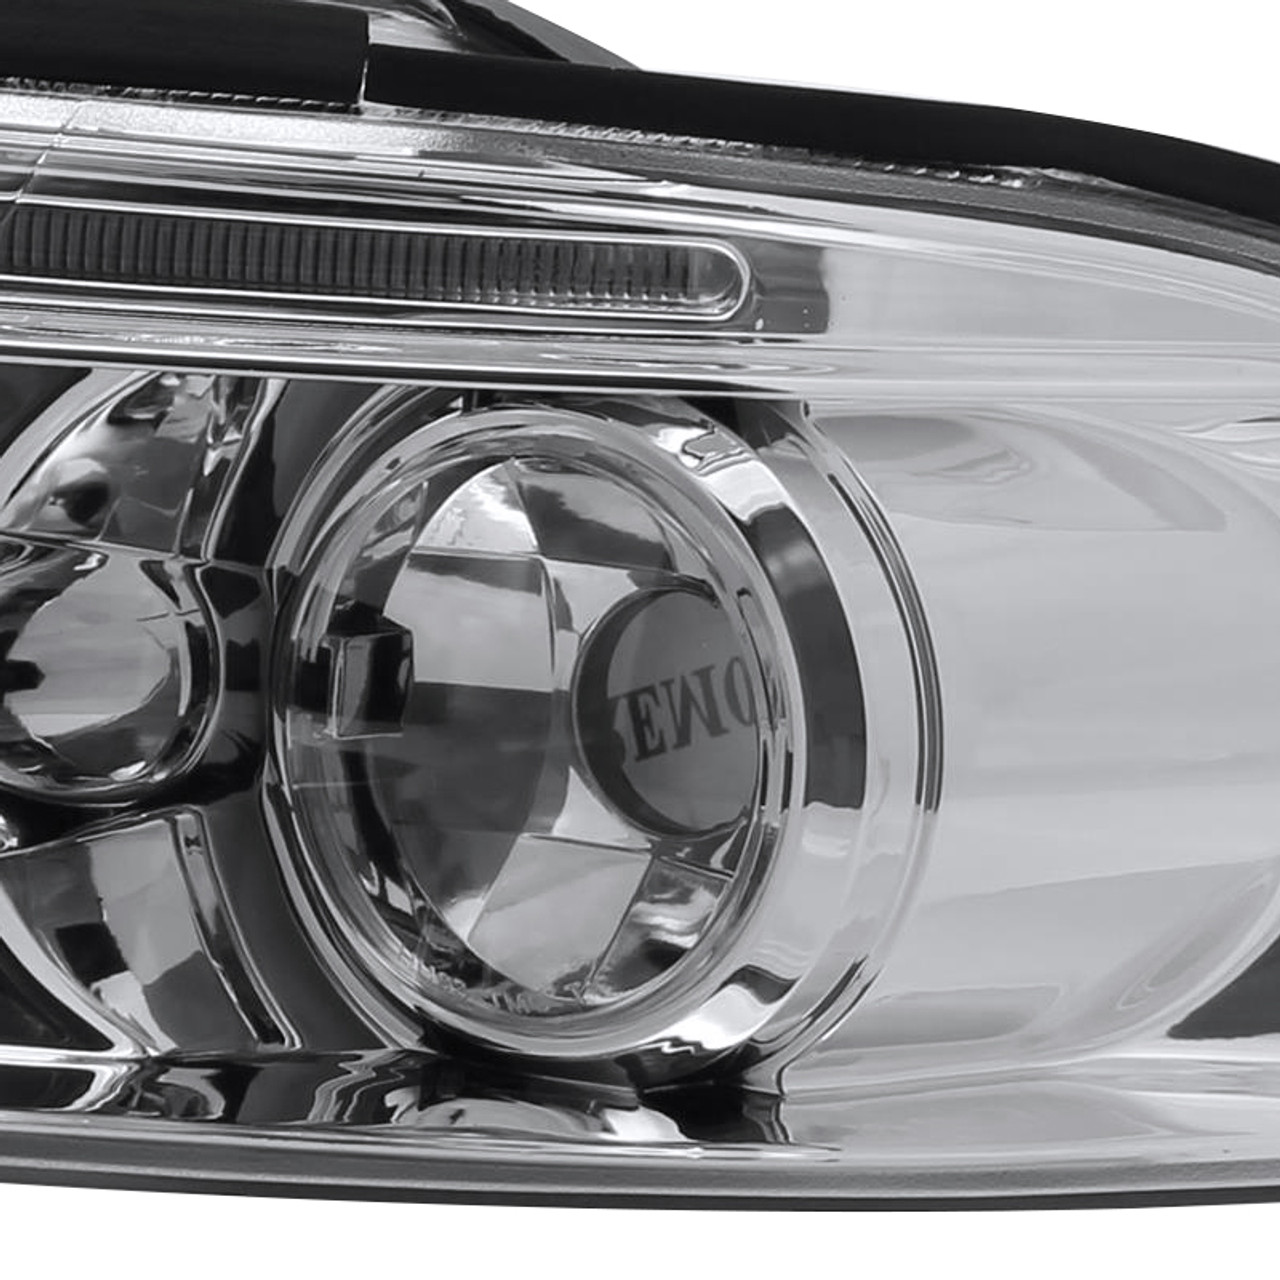 1992-2001 Audi A4 B5.5 / 2000-2002 S4 Euro ECODE Projector Headlight With  Clear Corner Lens